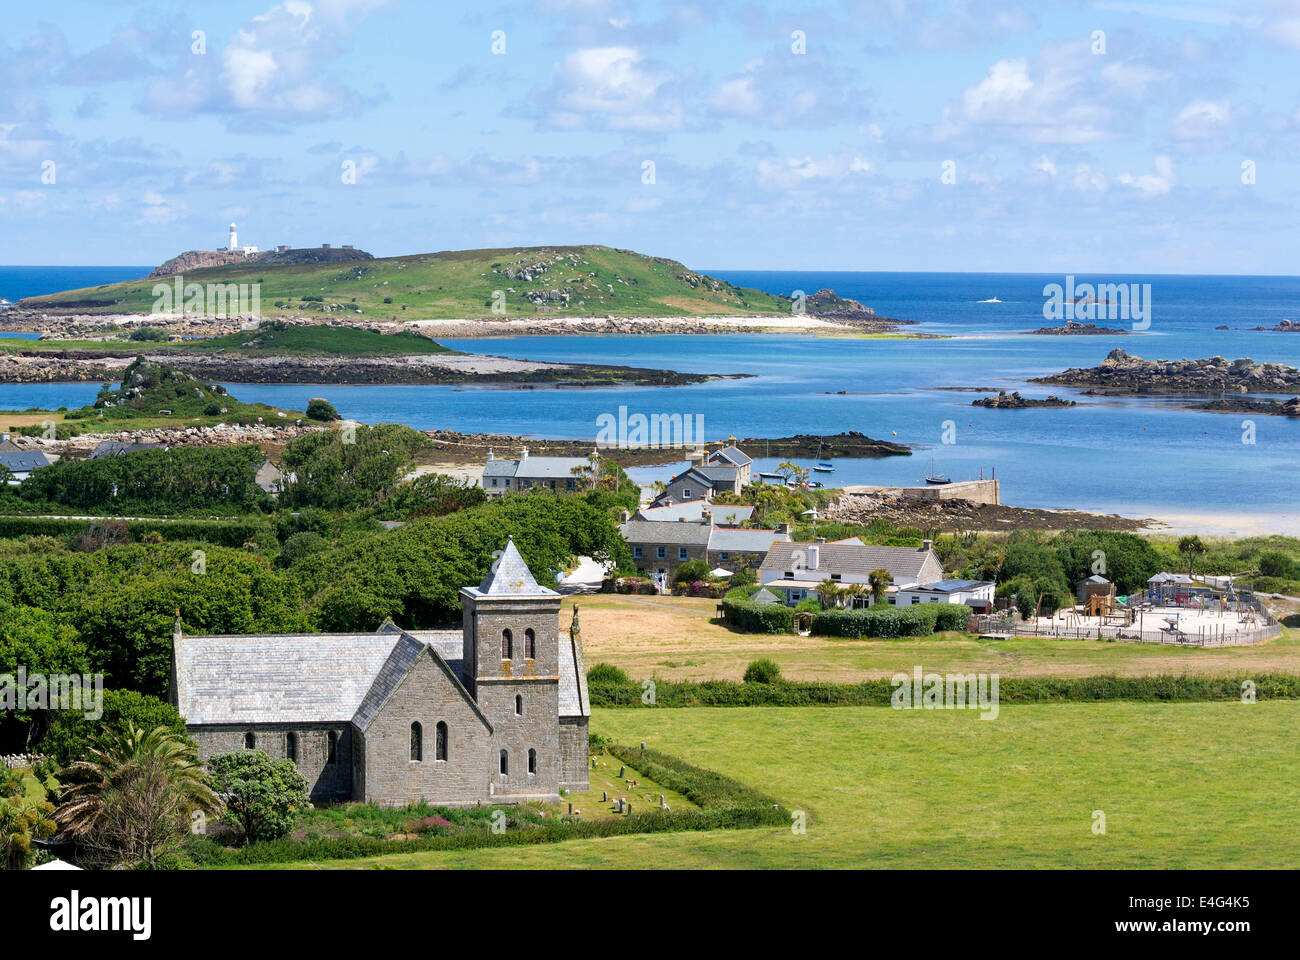 Tresco, Isles of Scilly, Cornwall England.  Looking towards Old Grimsby harbour with St Nicholas church in the foreground. Cornwall England UK. Stock Photo